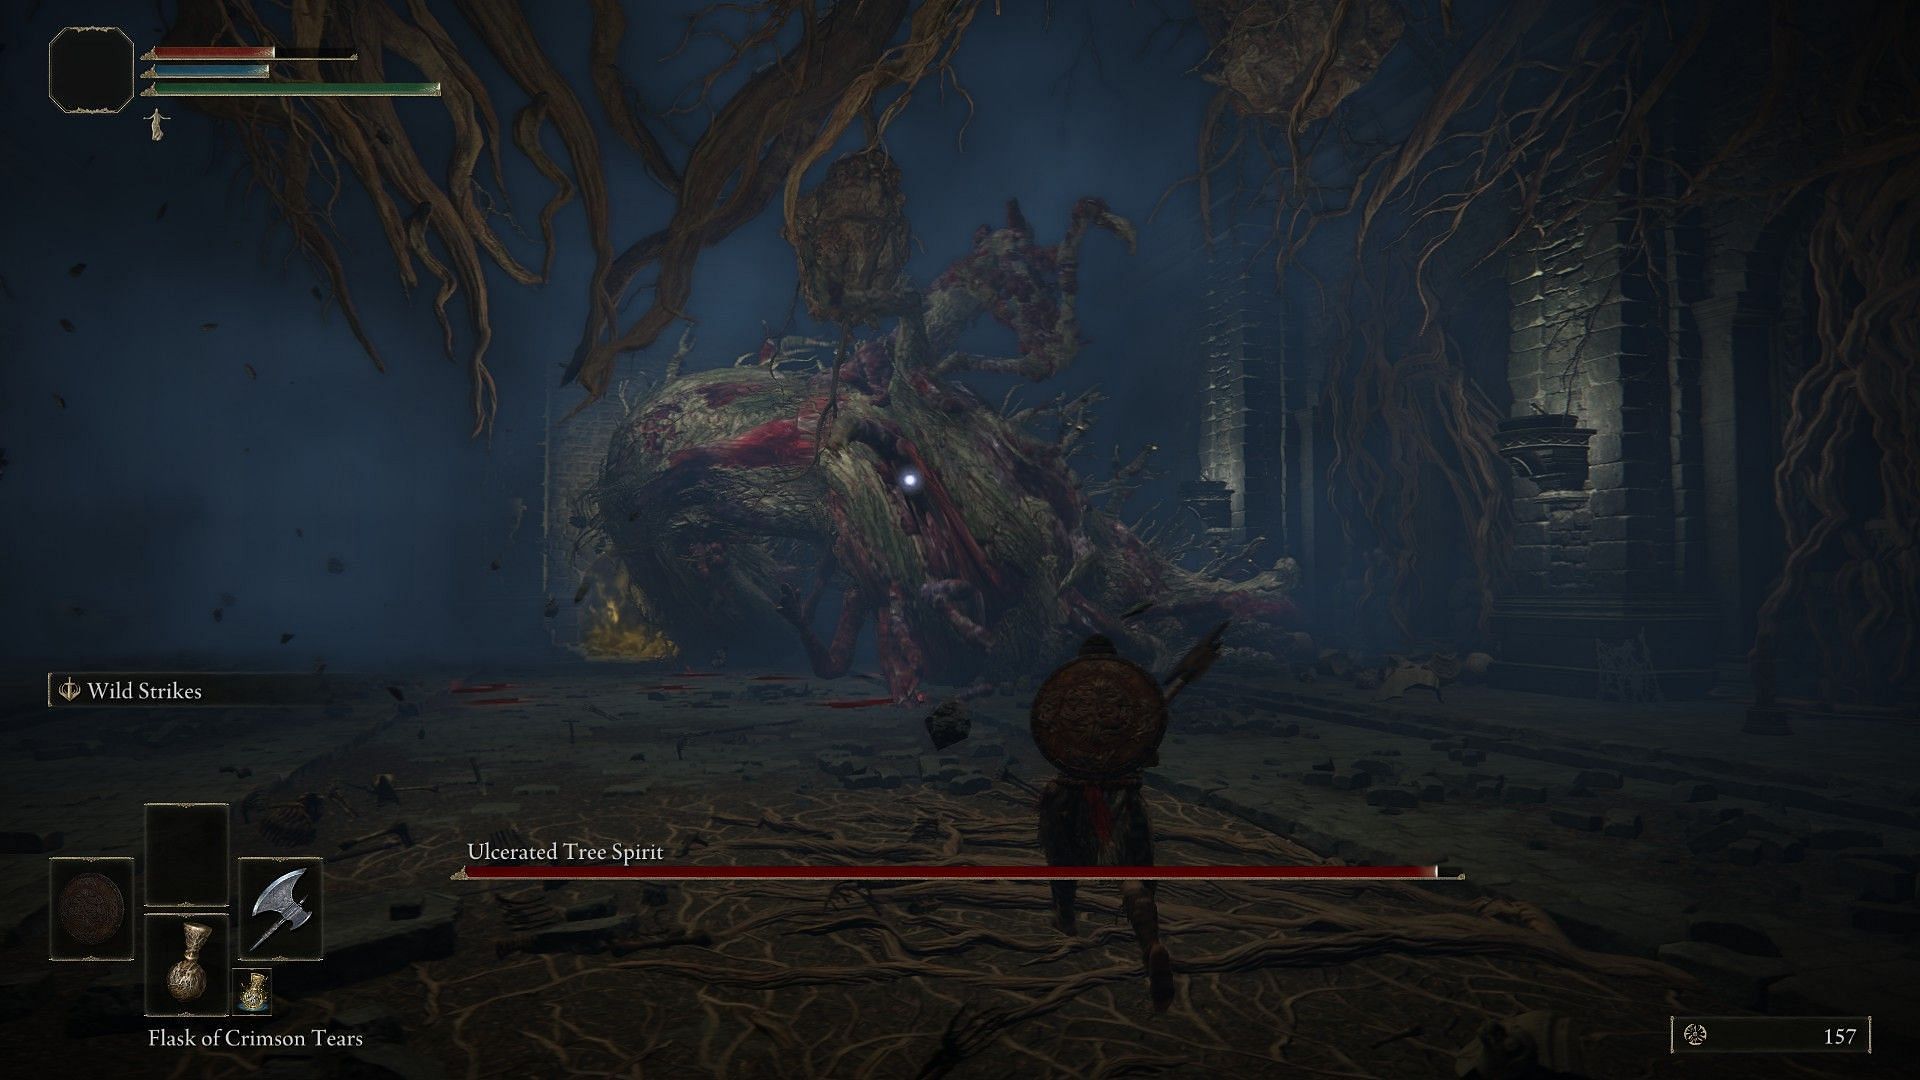 The Ulcerated Tree Spirit drops the Spirit Ash in Elden Ring (Image via FromSoftware Inc.)